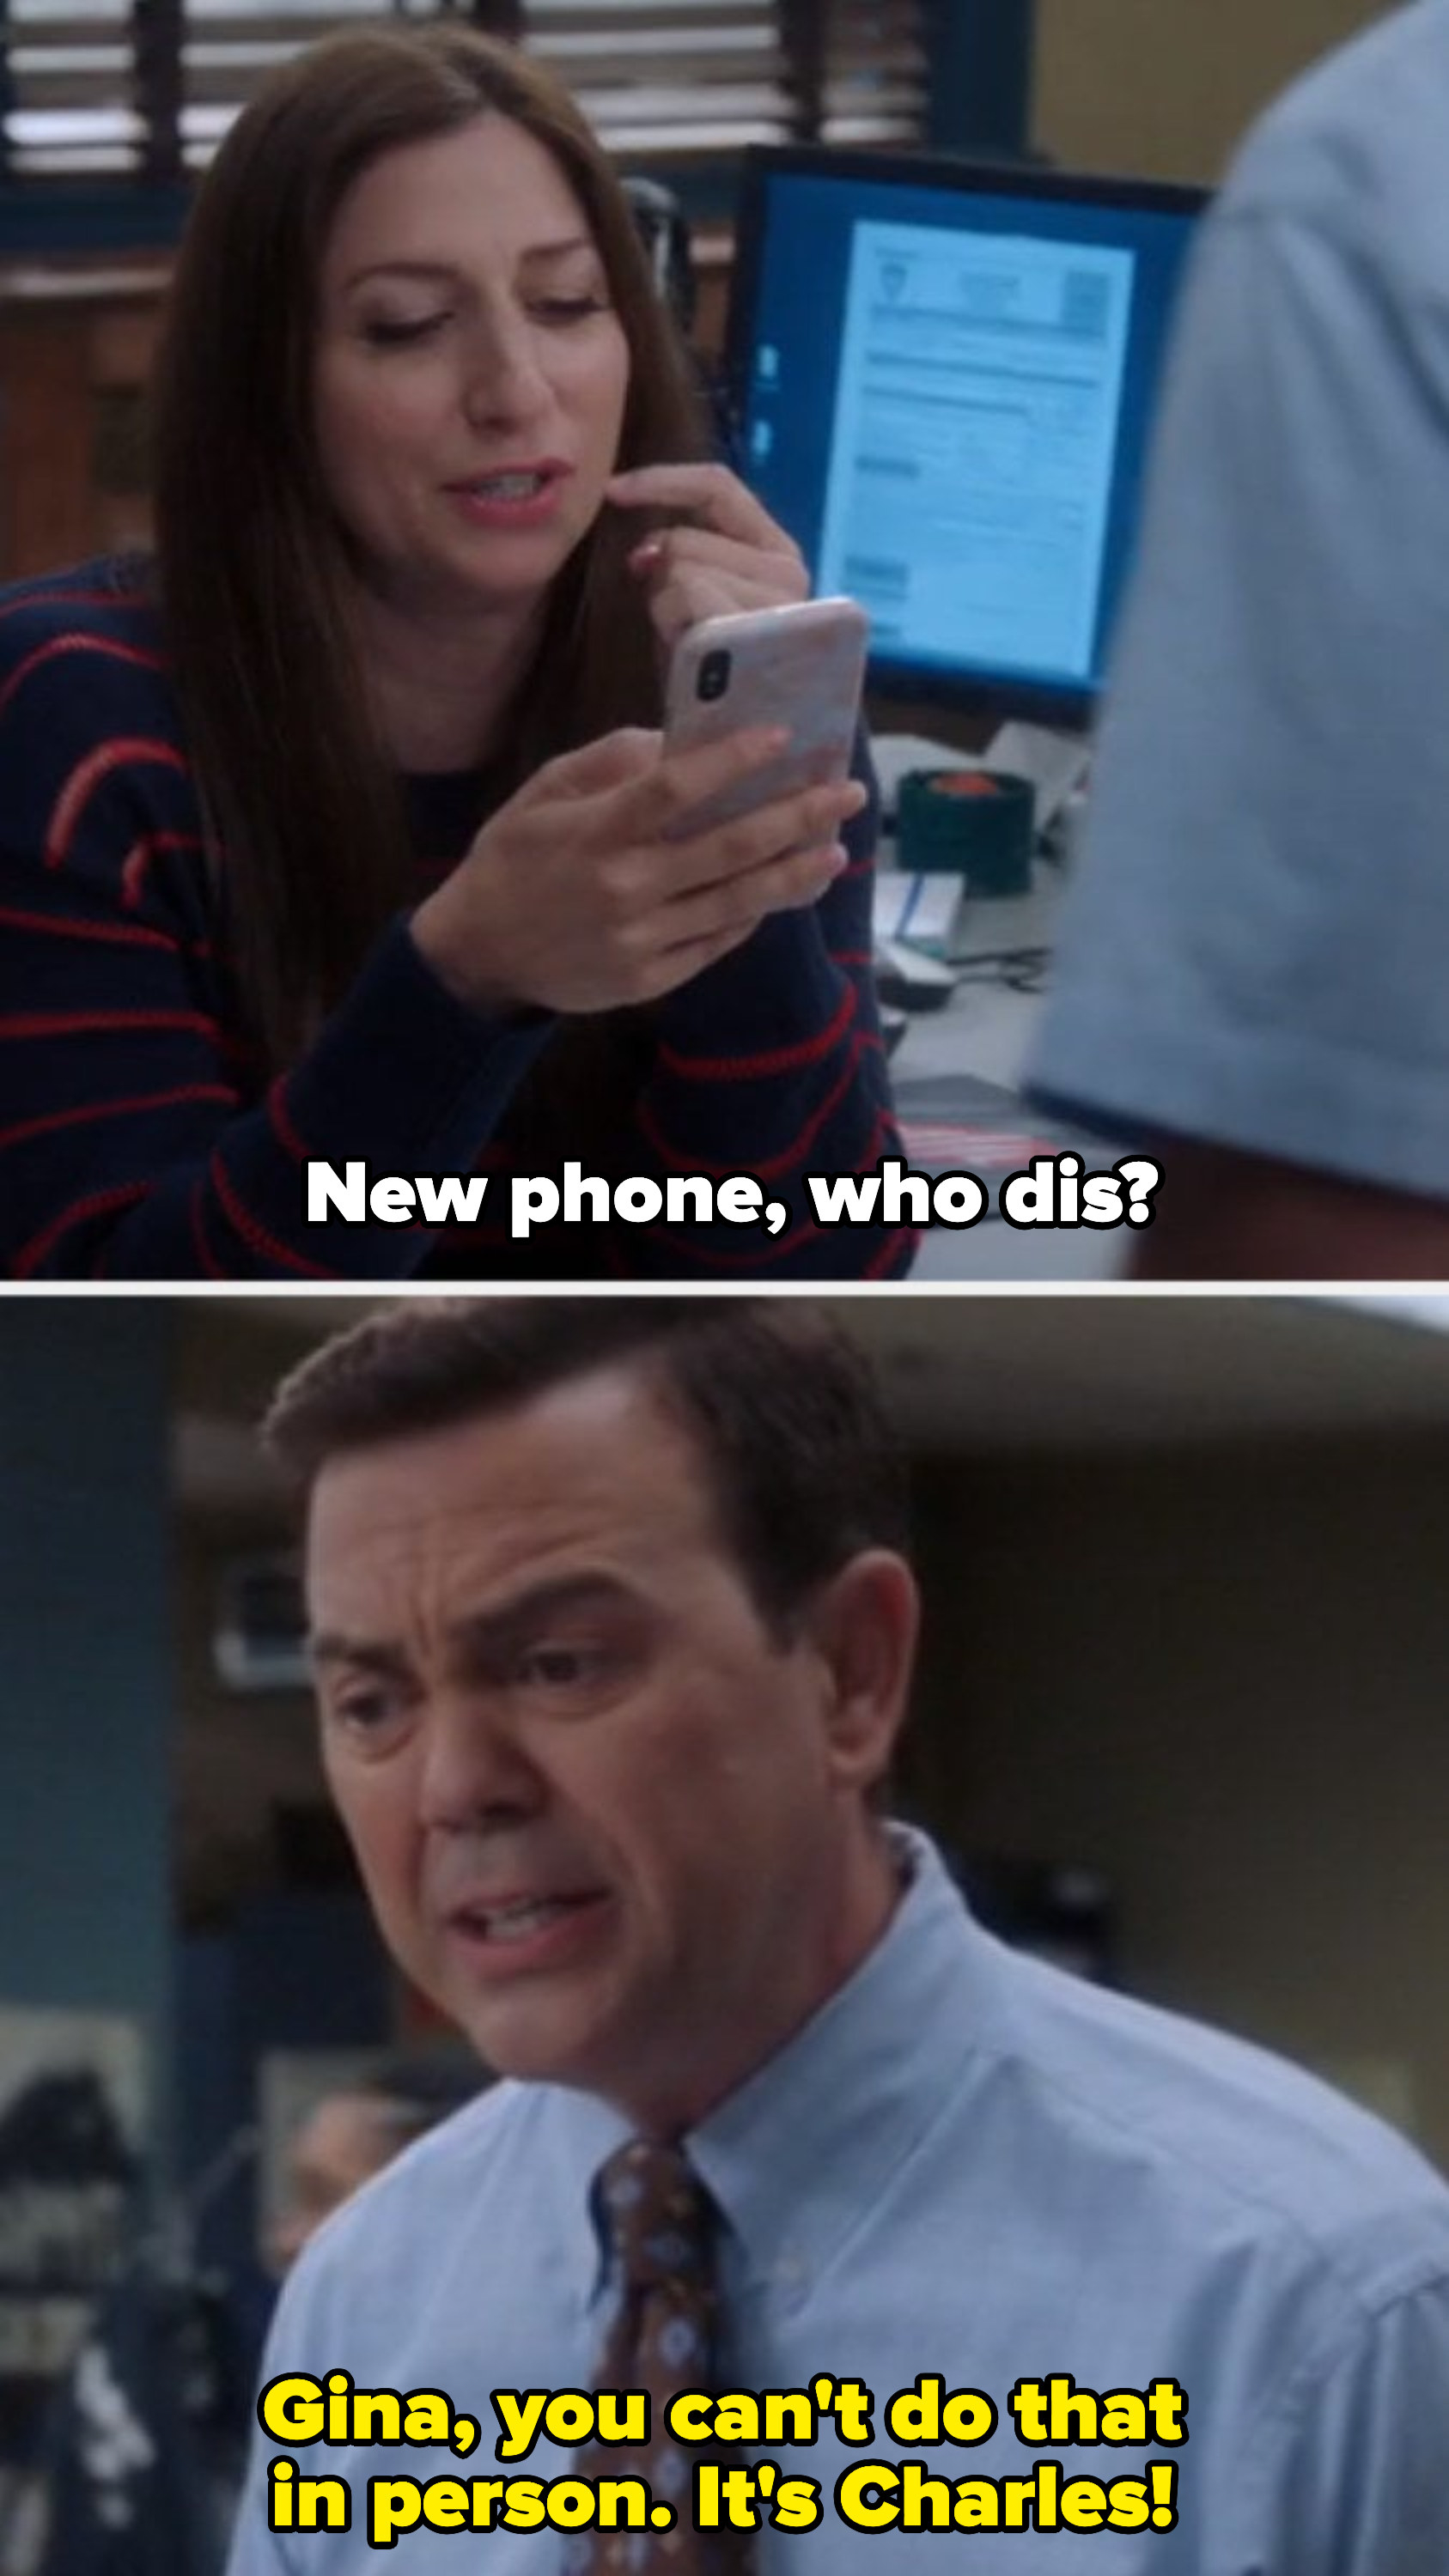 Gina: &quot;New phone, who dis?&quot; Charles: &quot;Gina, you can&#x27;t do that in person. It&#x27;s Charles!&quot;